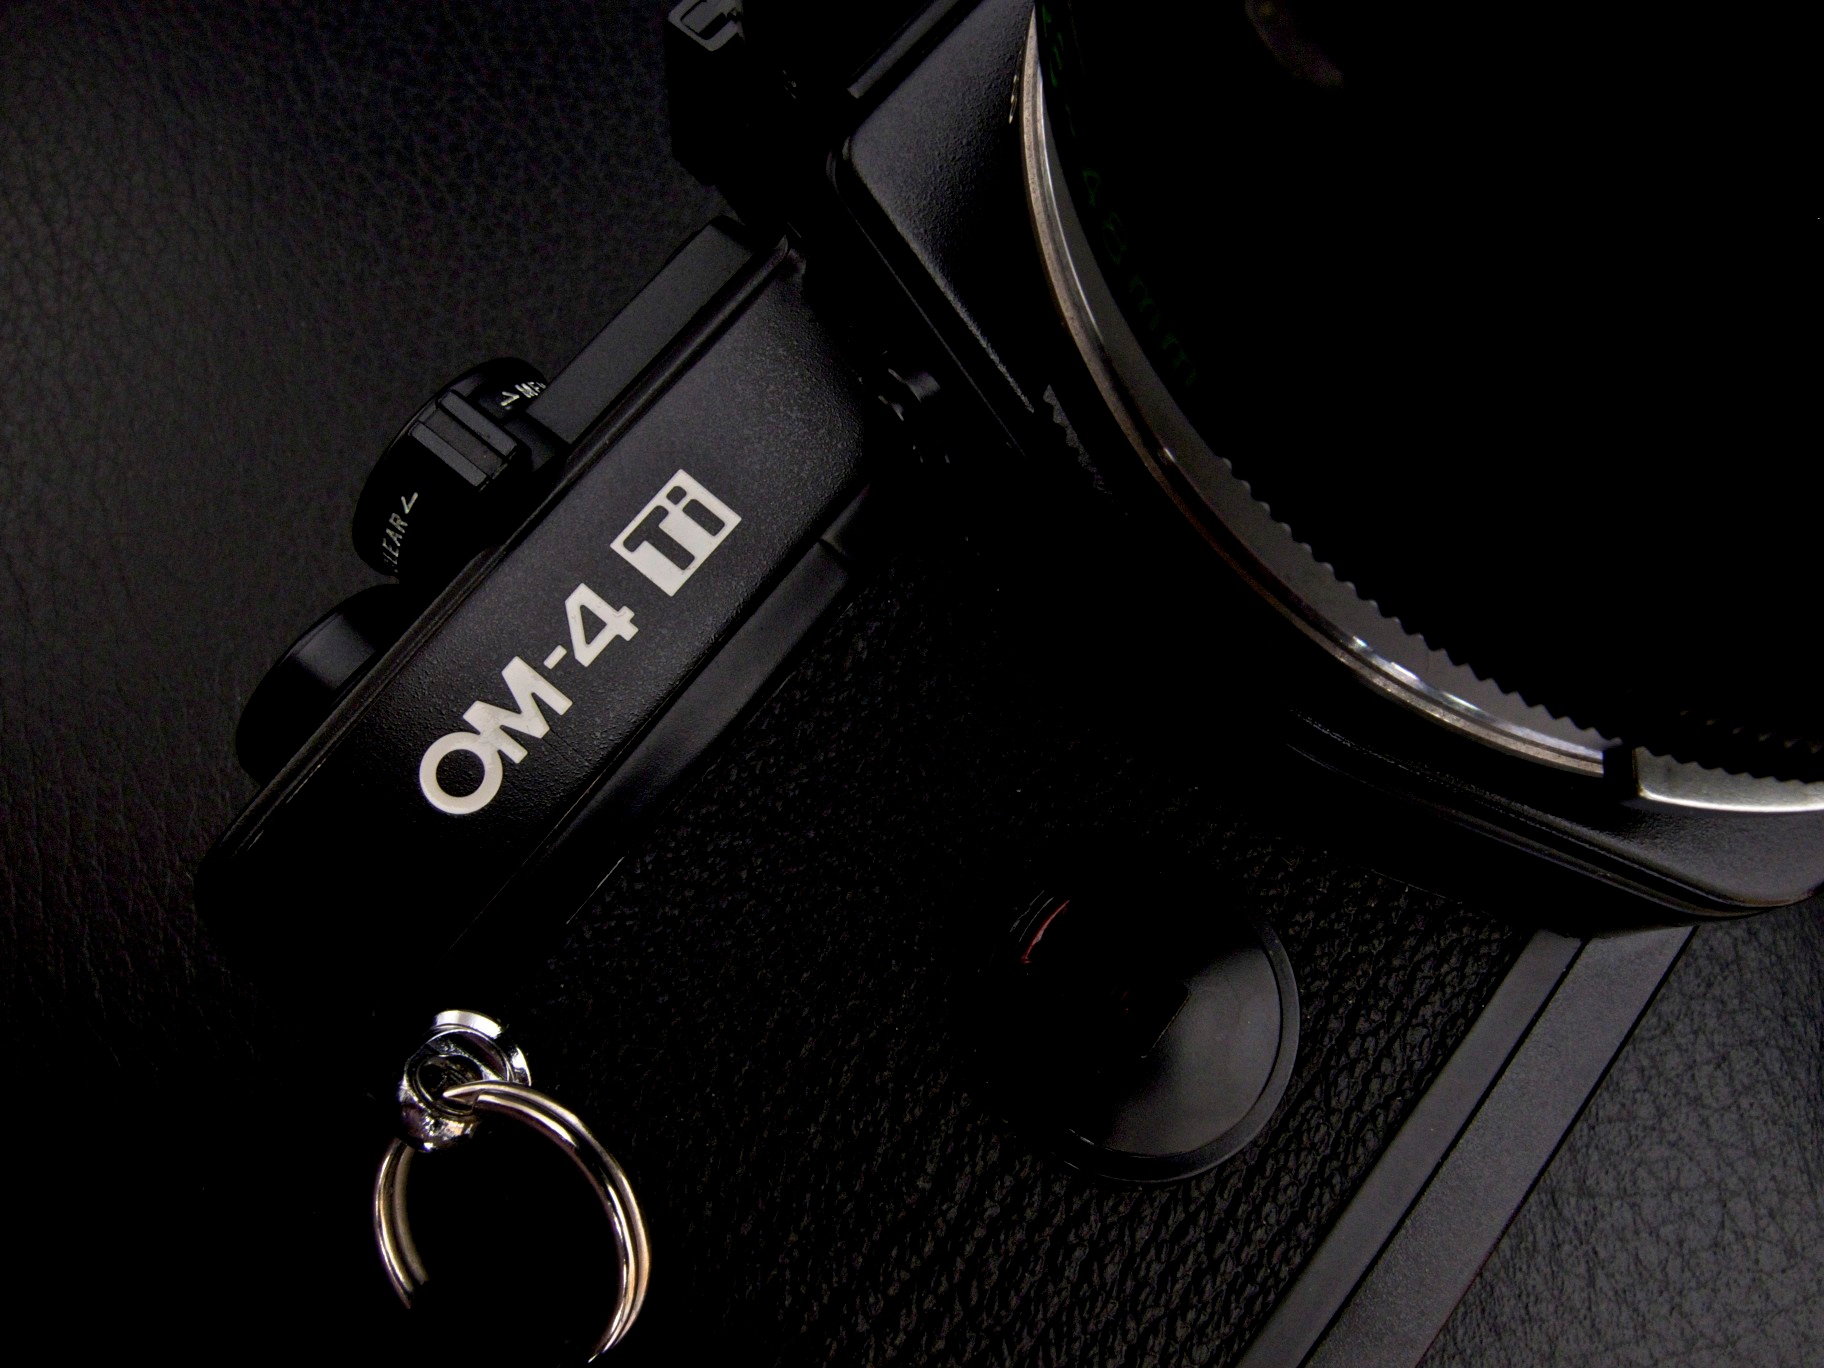    Overtaken first by autofocus cameras and ultimately by Digital, the manual spot-metering OM-4Ti is now regarded as ‘one of the finest SLR’s of its generation for the serious and purist film photographer’ (Wikipedia)      